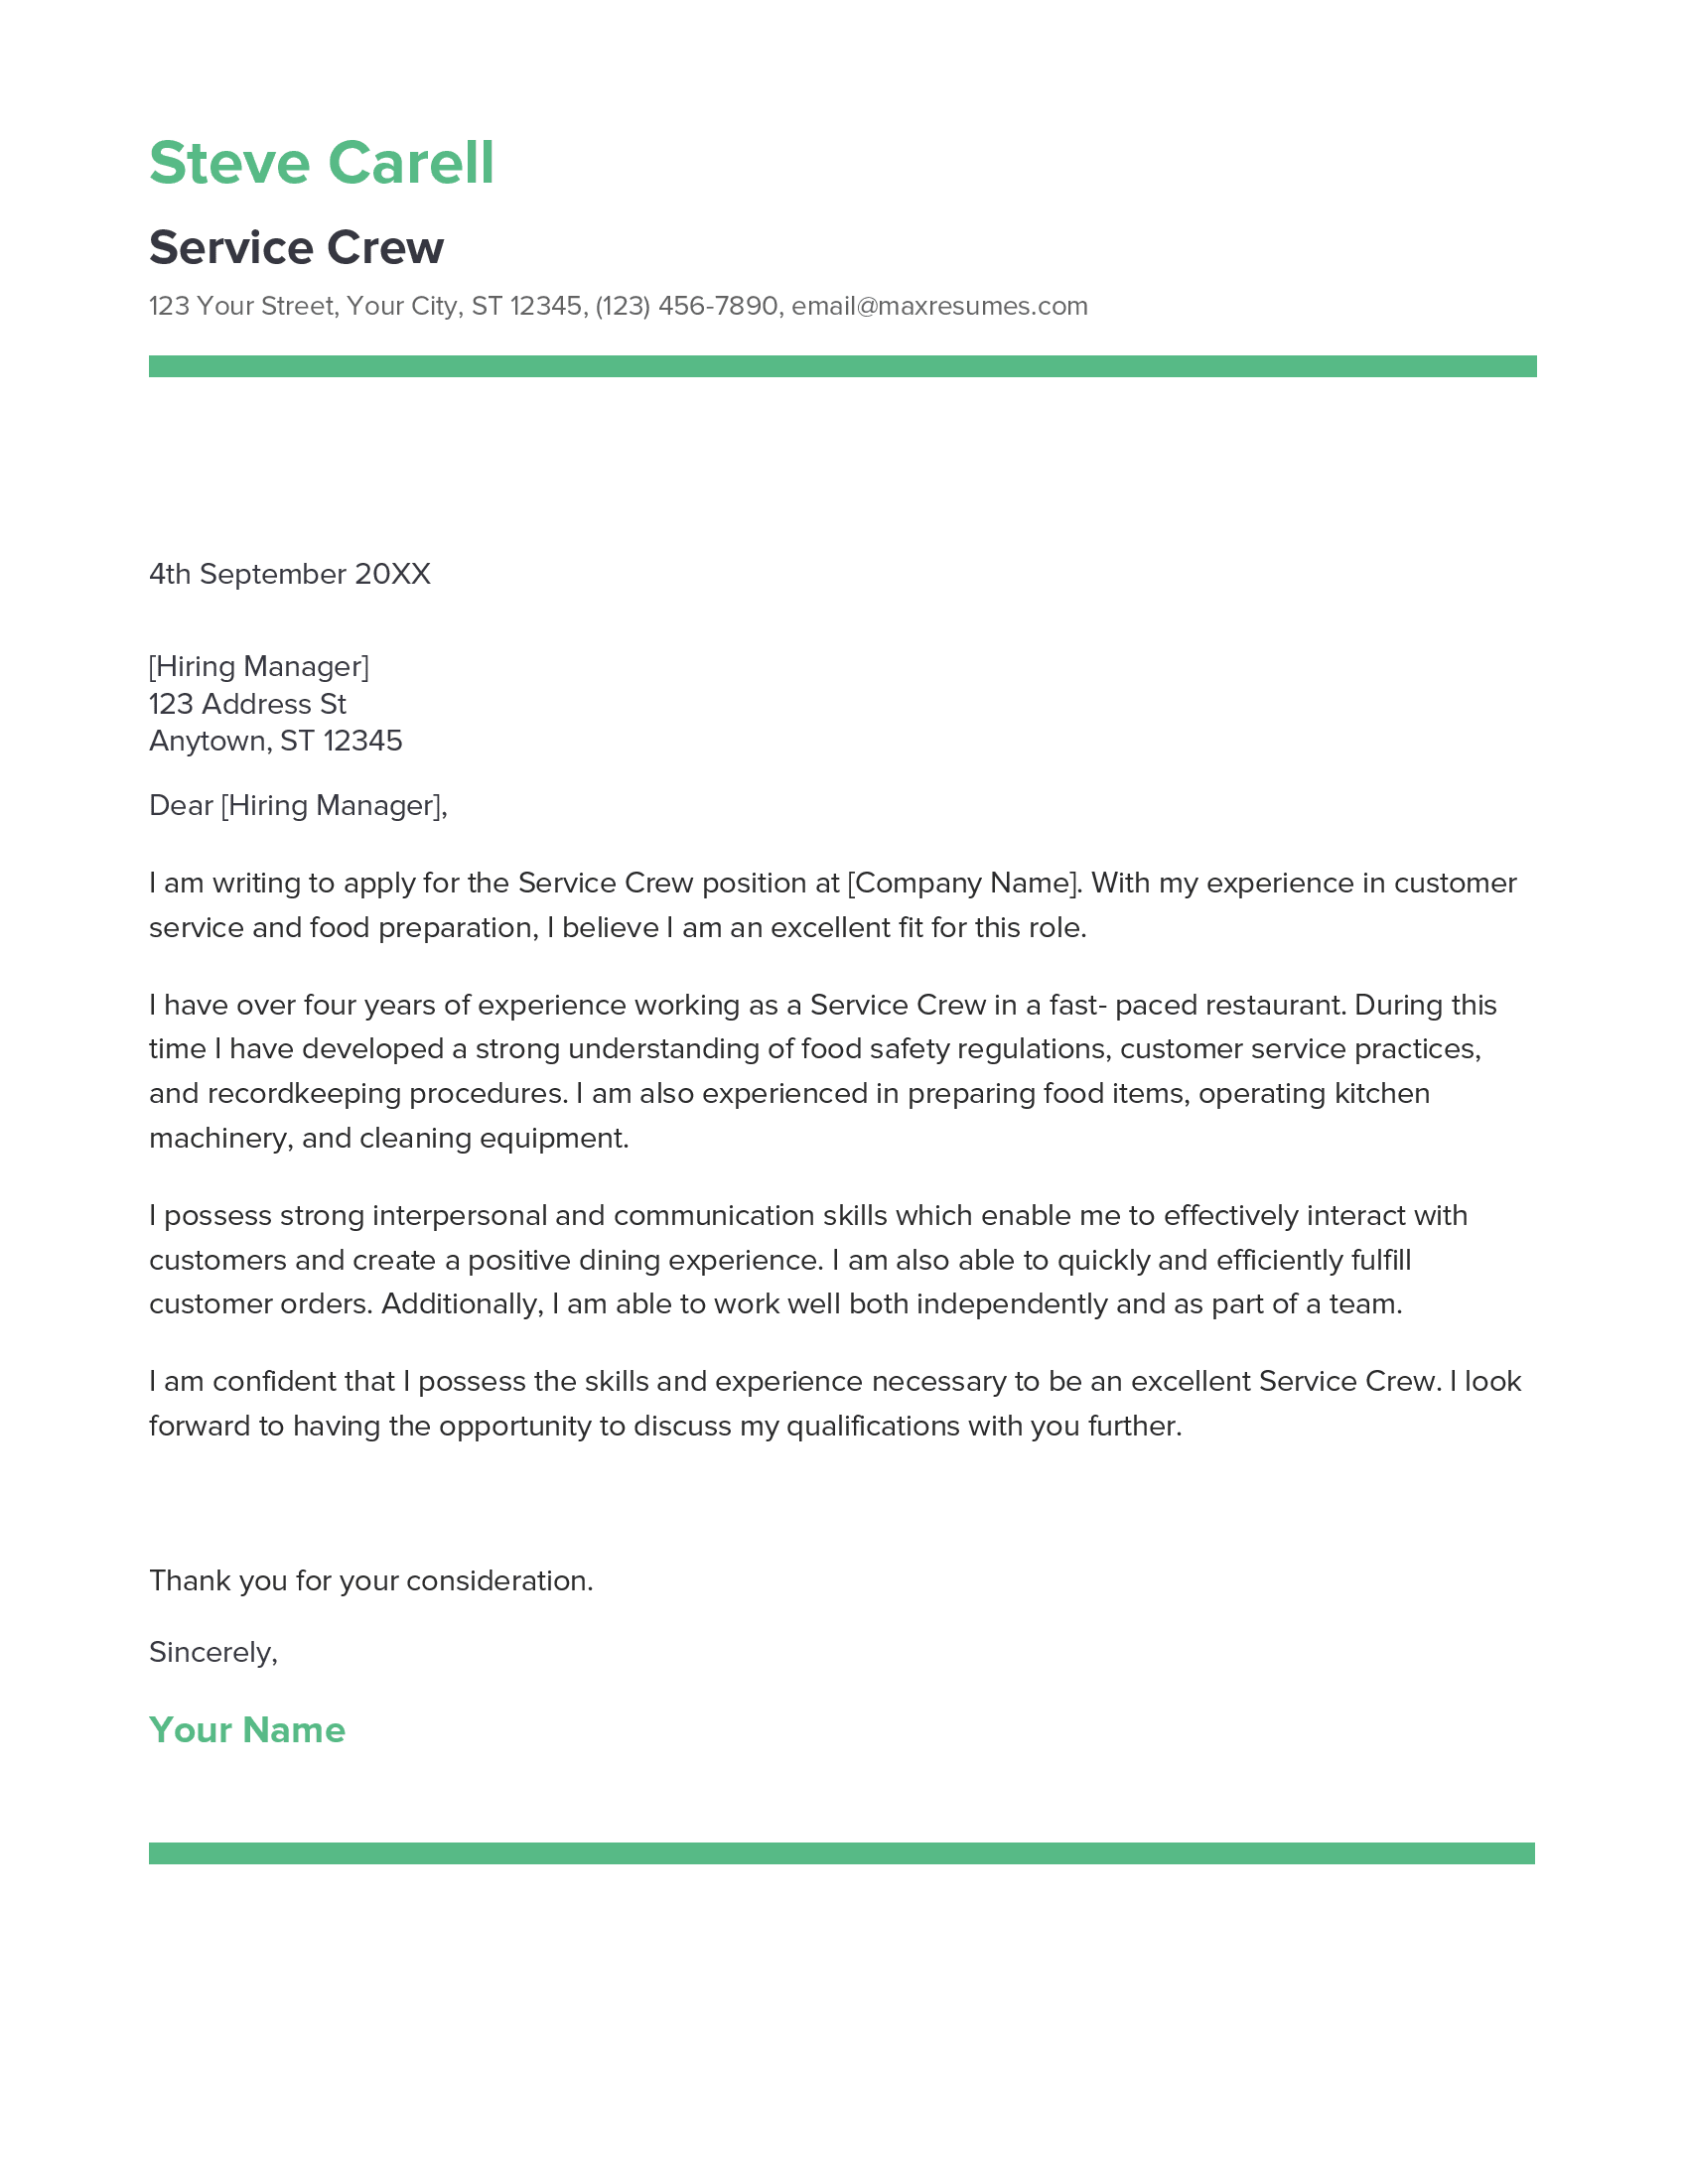 Service Crew Cover Letter Example